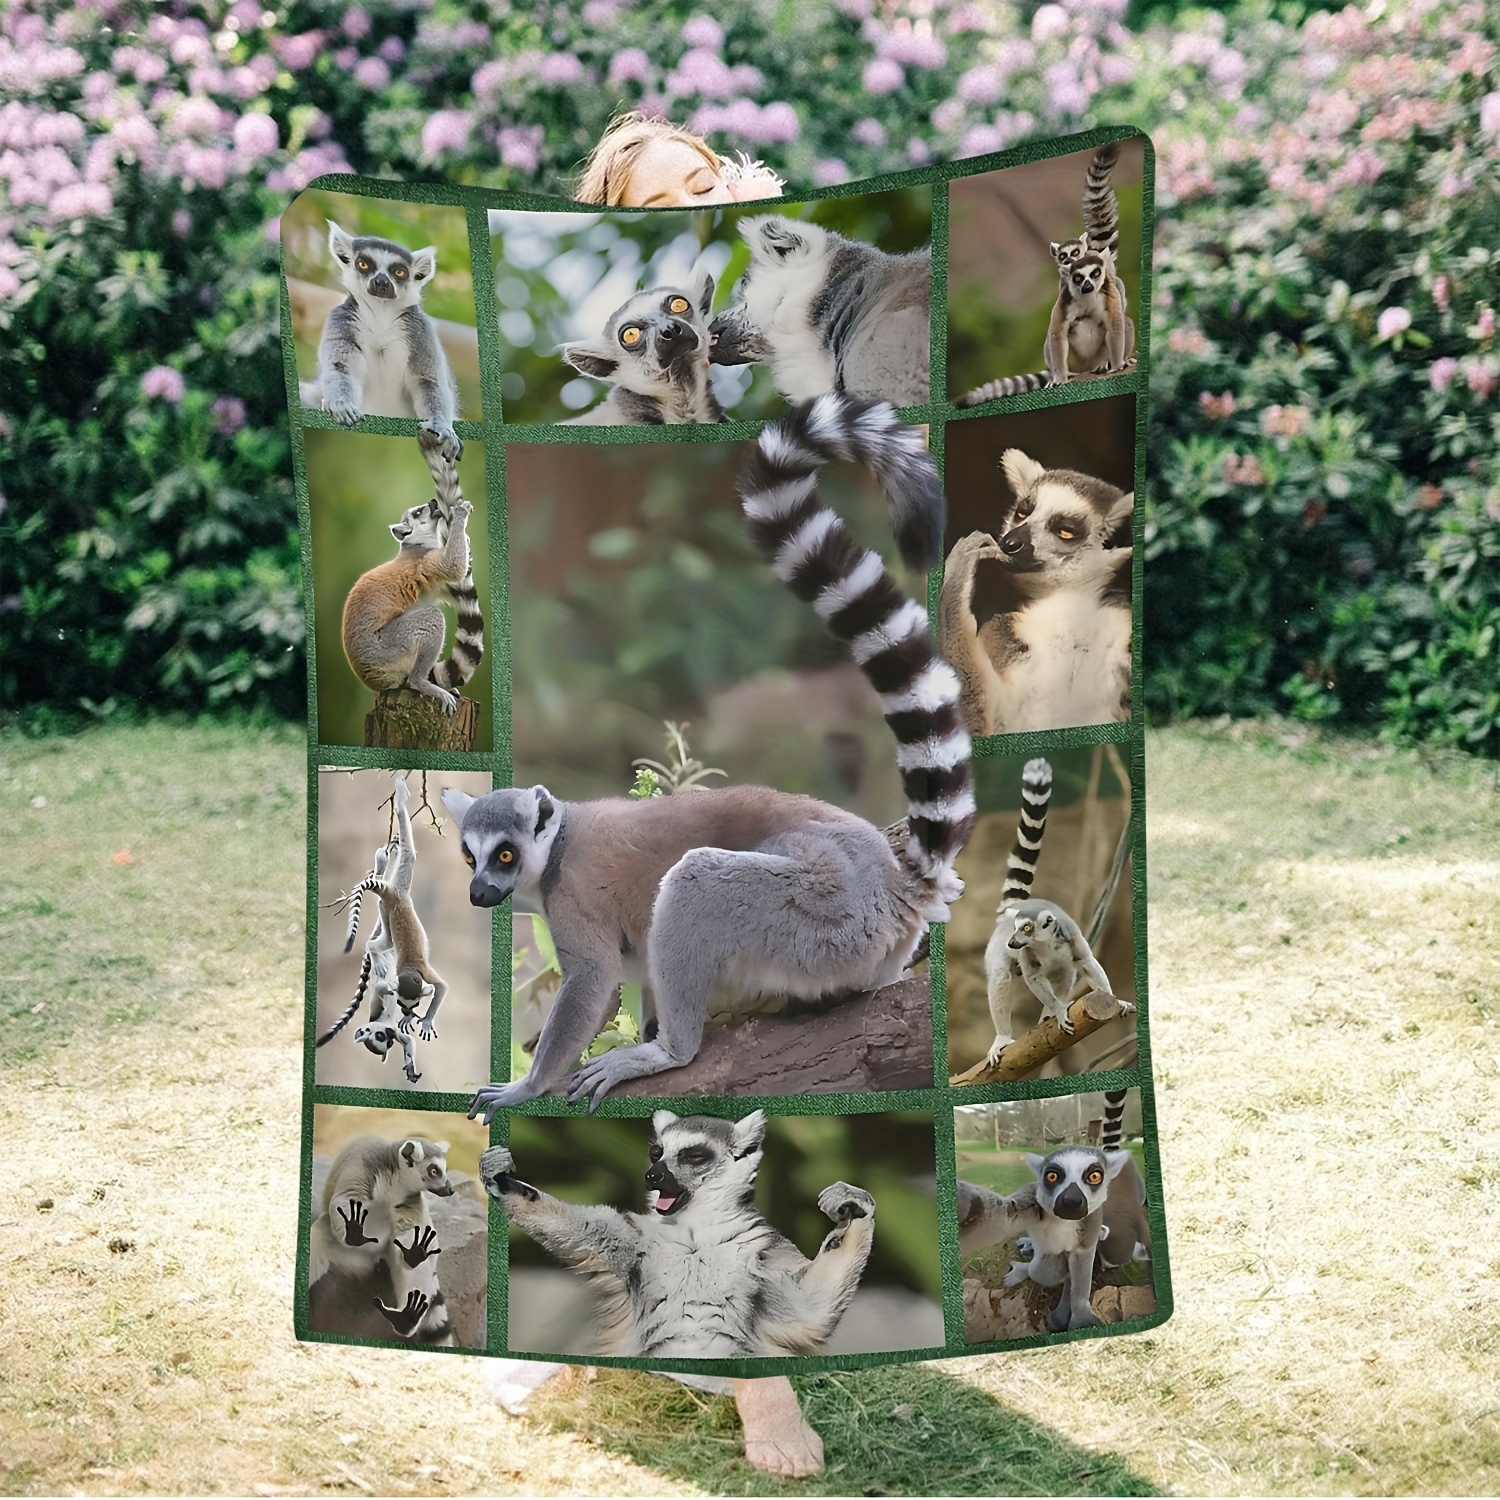 

Style Lemur Print Soft Flannel Throw Blanket, Animal Theme Knitted Polyester With Mixed Embellishments, Cozy All-season Tv Blanket, Unique Gift For Animal Lovers